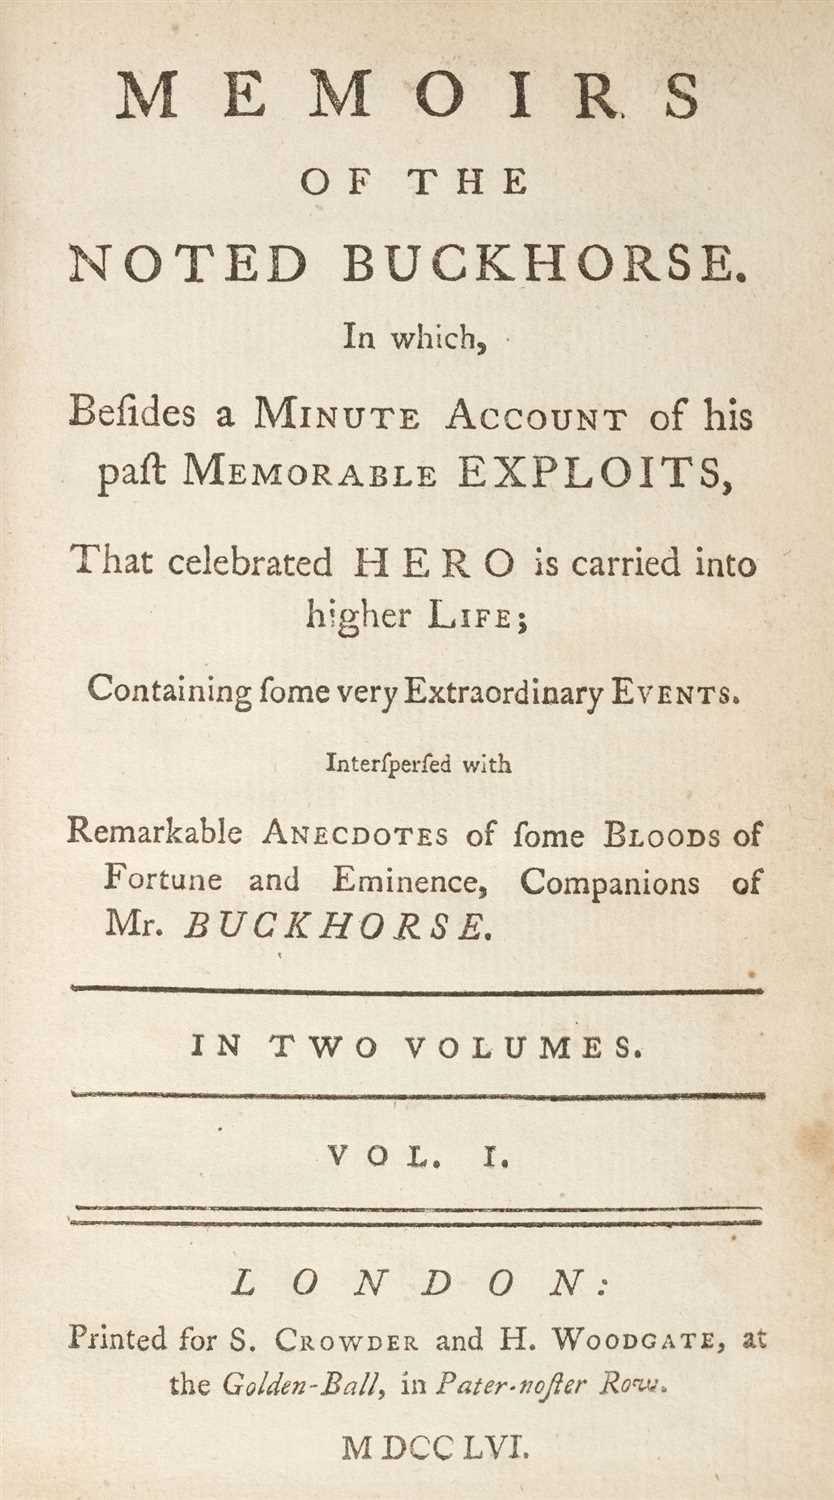 Lot 217 - Anstey (Christopher). Memoirs of the Noted Buckhorse, 1756